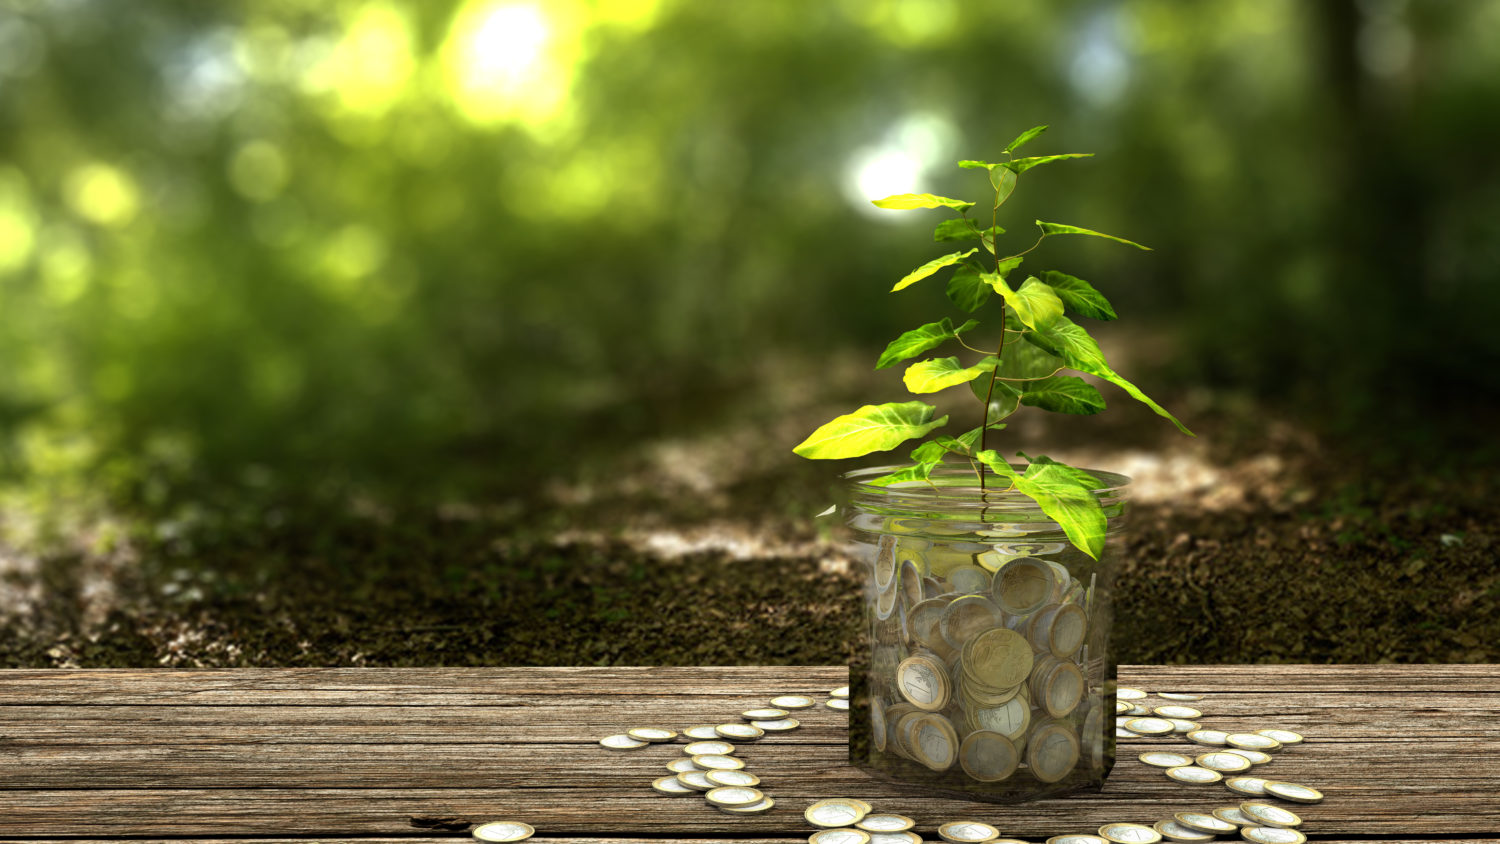 Plant growing from money jar. Concept of financial investment.